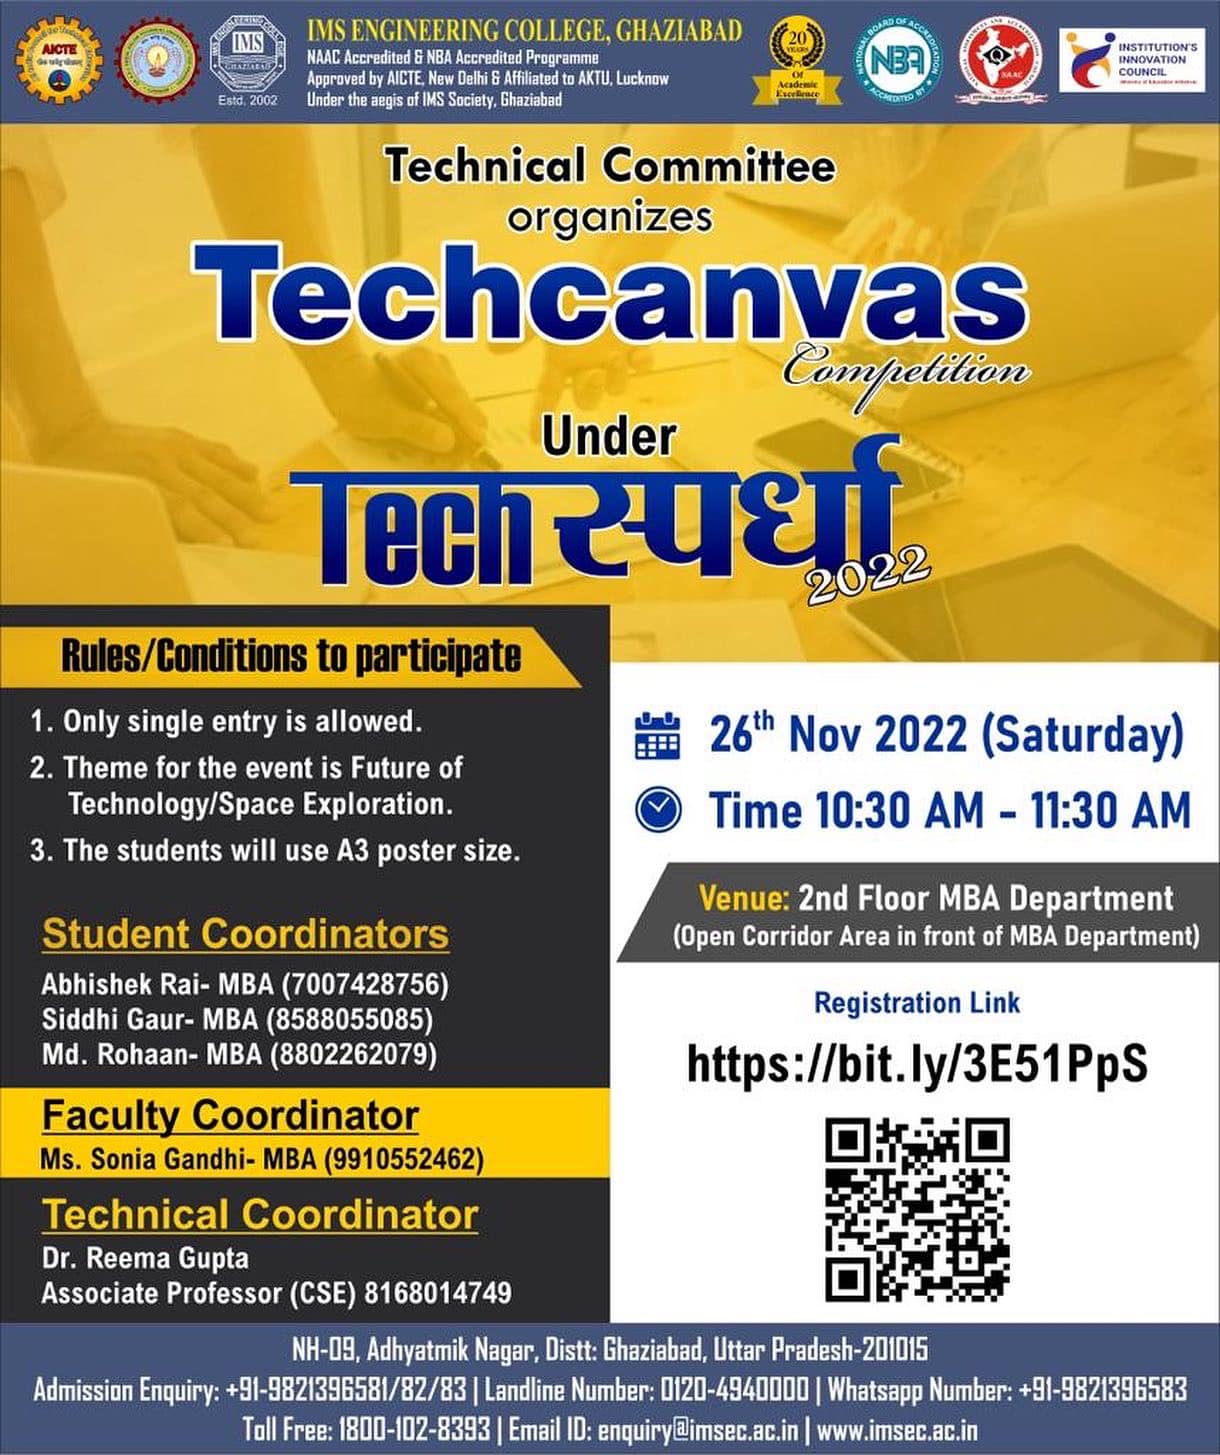 Techspardha organised by Technical Committee